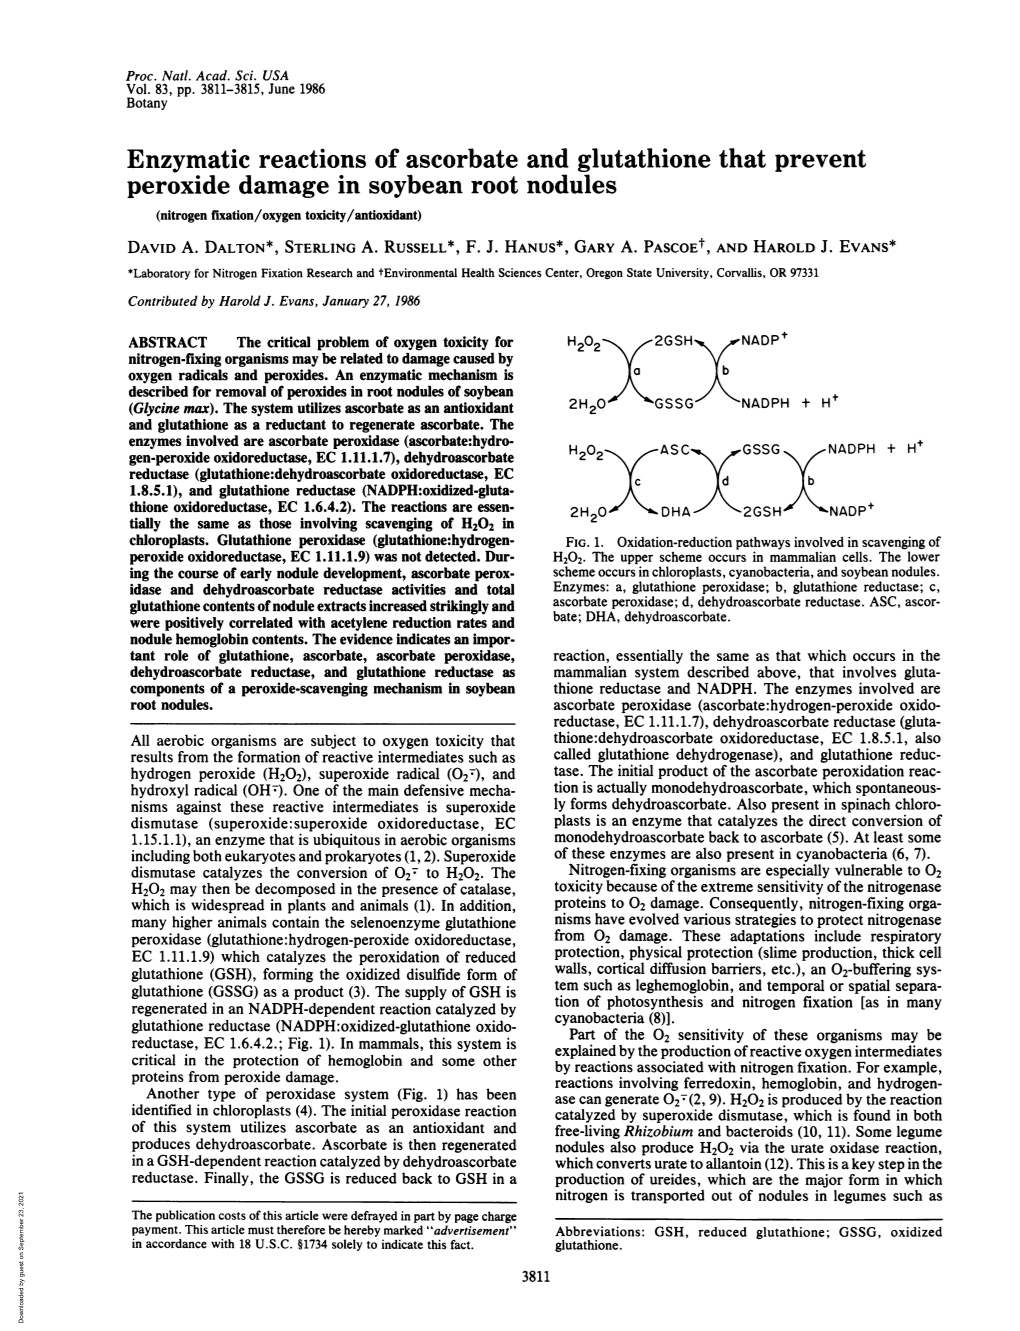 Enzymatic Reactions of Ascorbate and Glutathione That Prevent Peroxide Damage in Soybean Root Nodules (Nitrogen Fixation/Oxygen Toxicity/Antioxidant) DAVID A